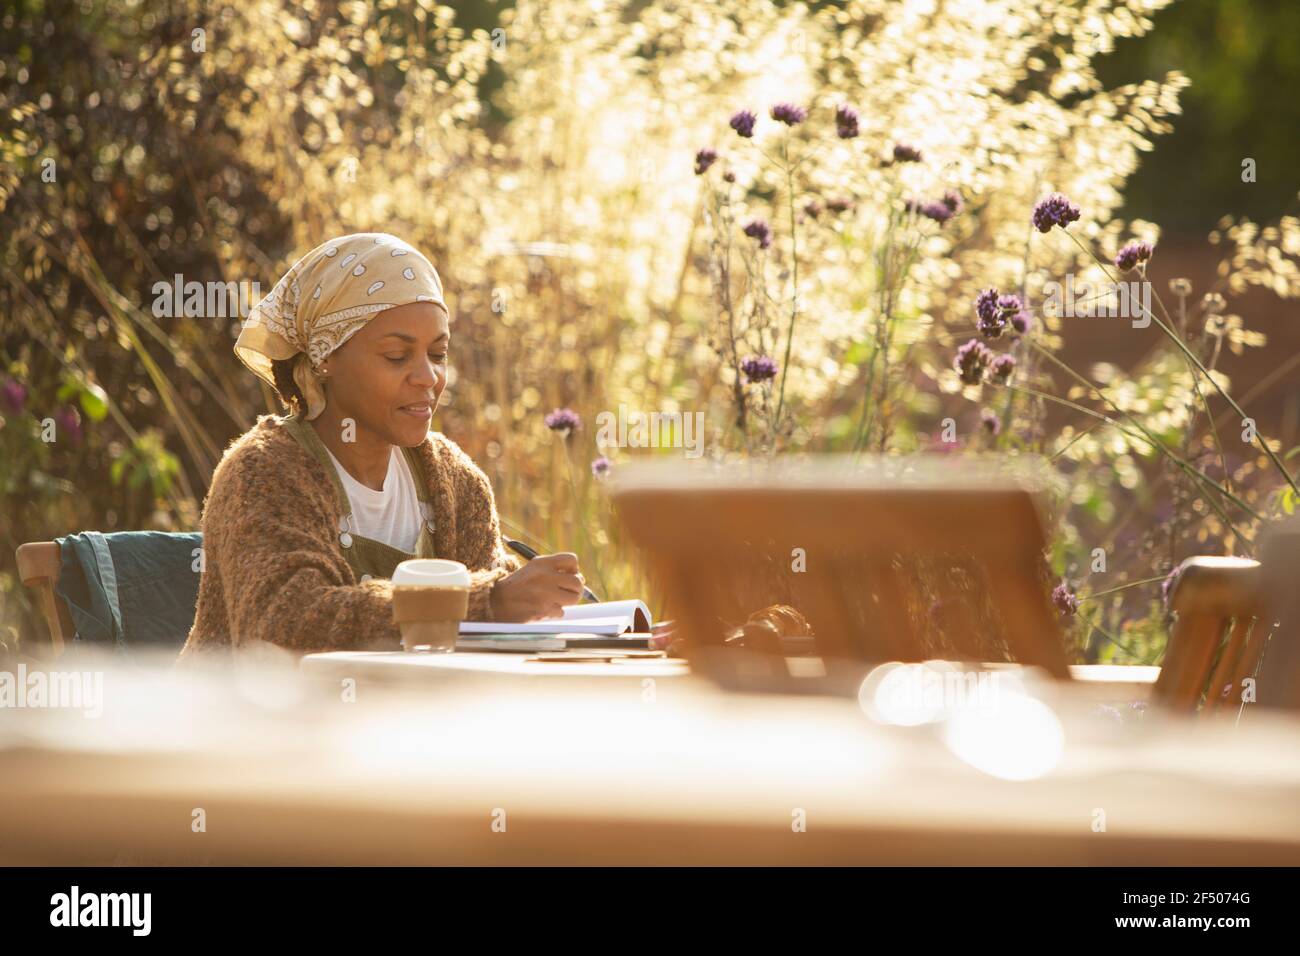 Woman working at cafe table in sunny garden Stock Photo